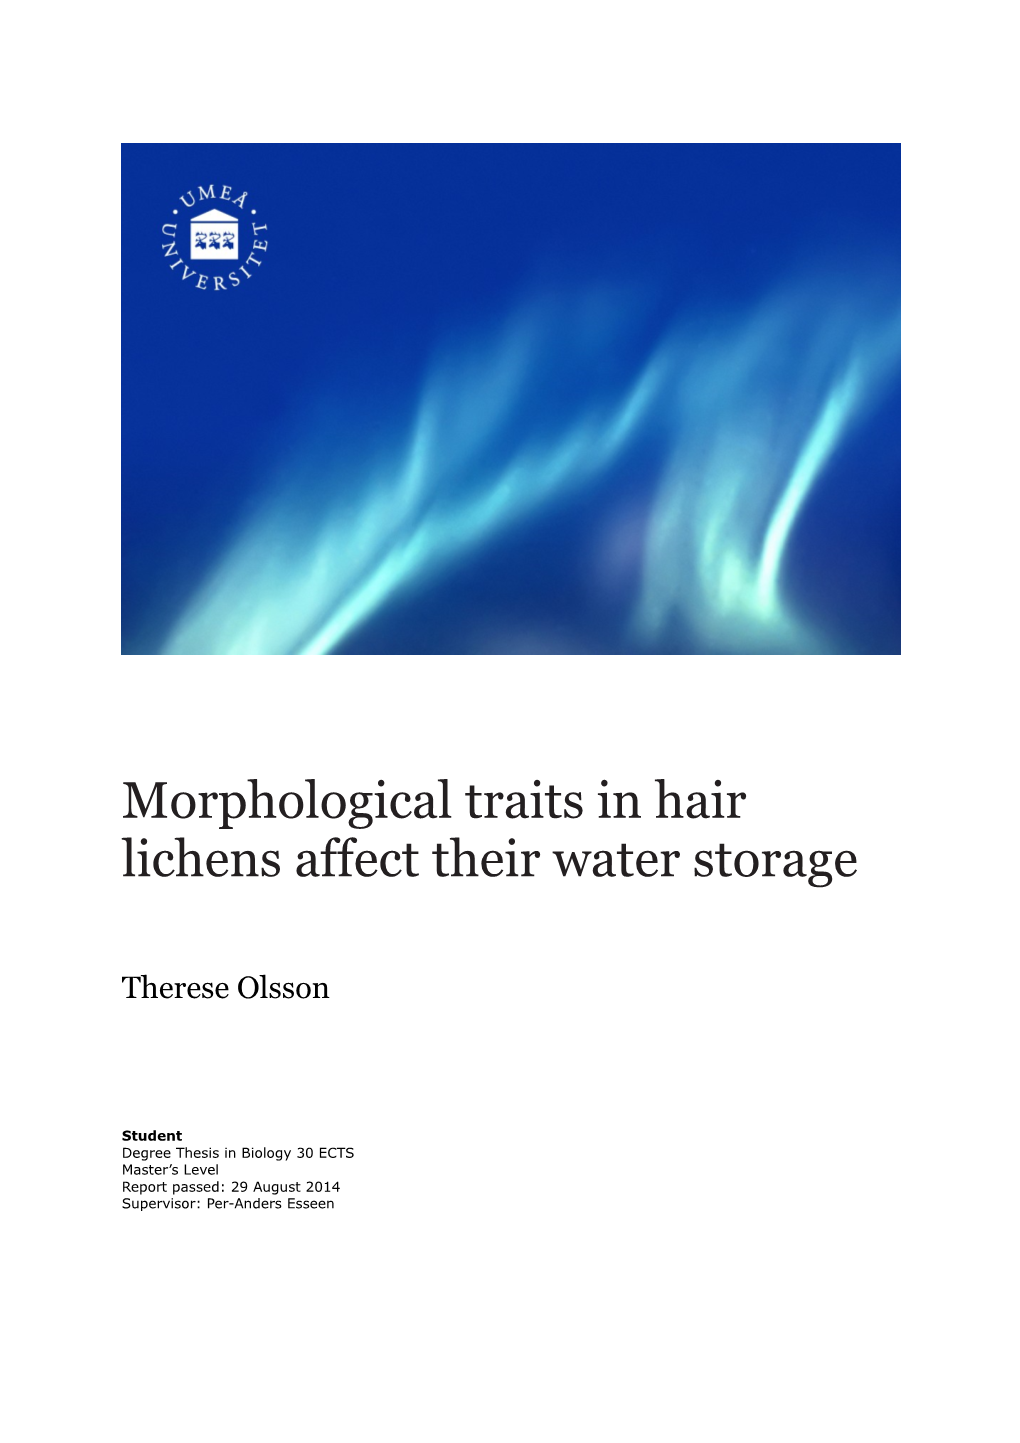 Morphological Traits in Hair Lichens Affect Their Water Storage